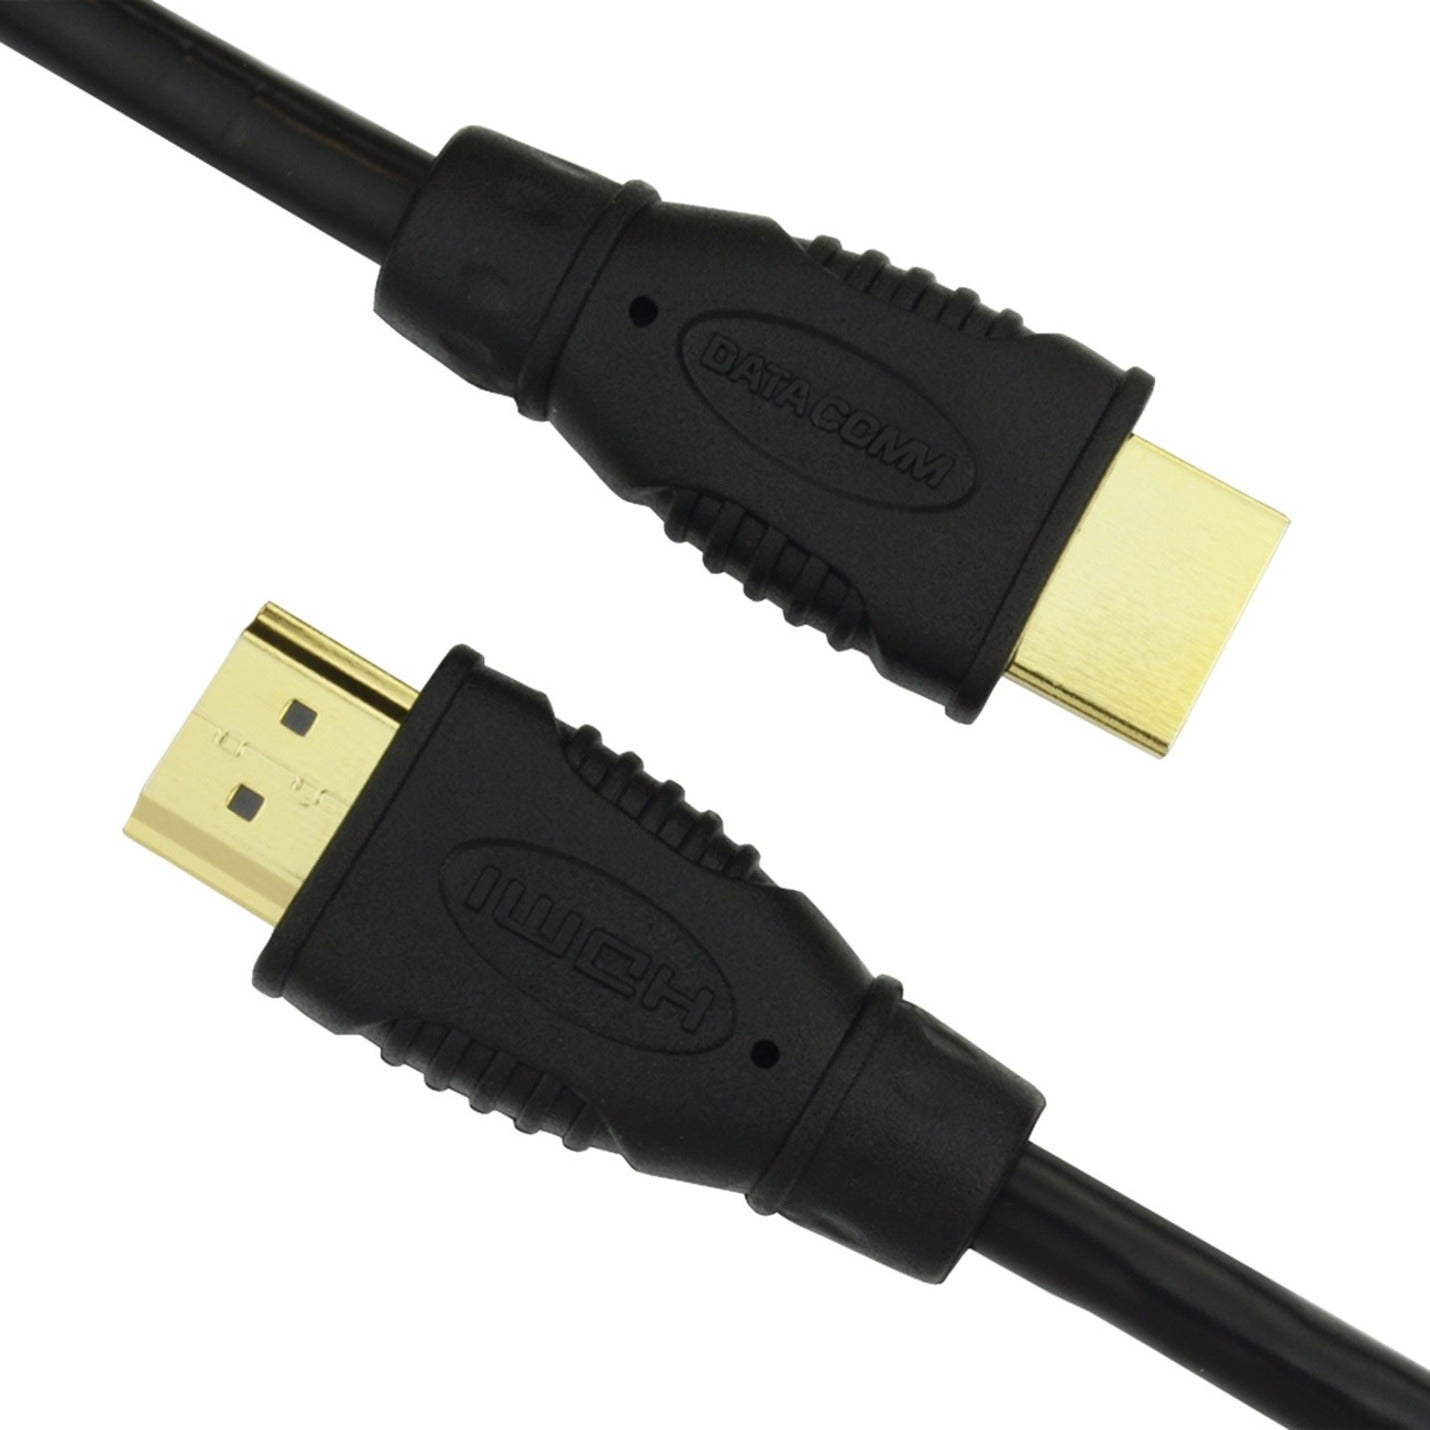 DataComm 46-1012-BK TrueStream Pro HDMI Audio/Video Cable, 12 ft, Gold-Plated Connectors, 4K Ultra HD Support